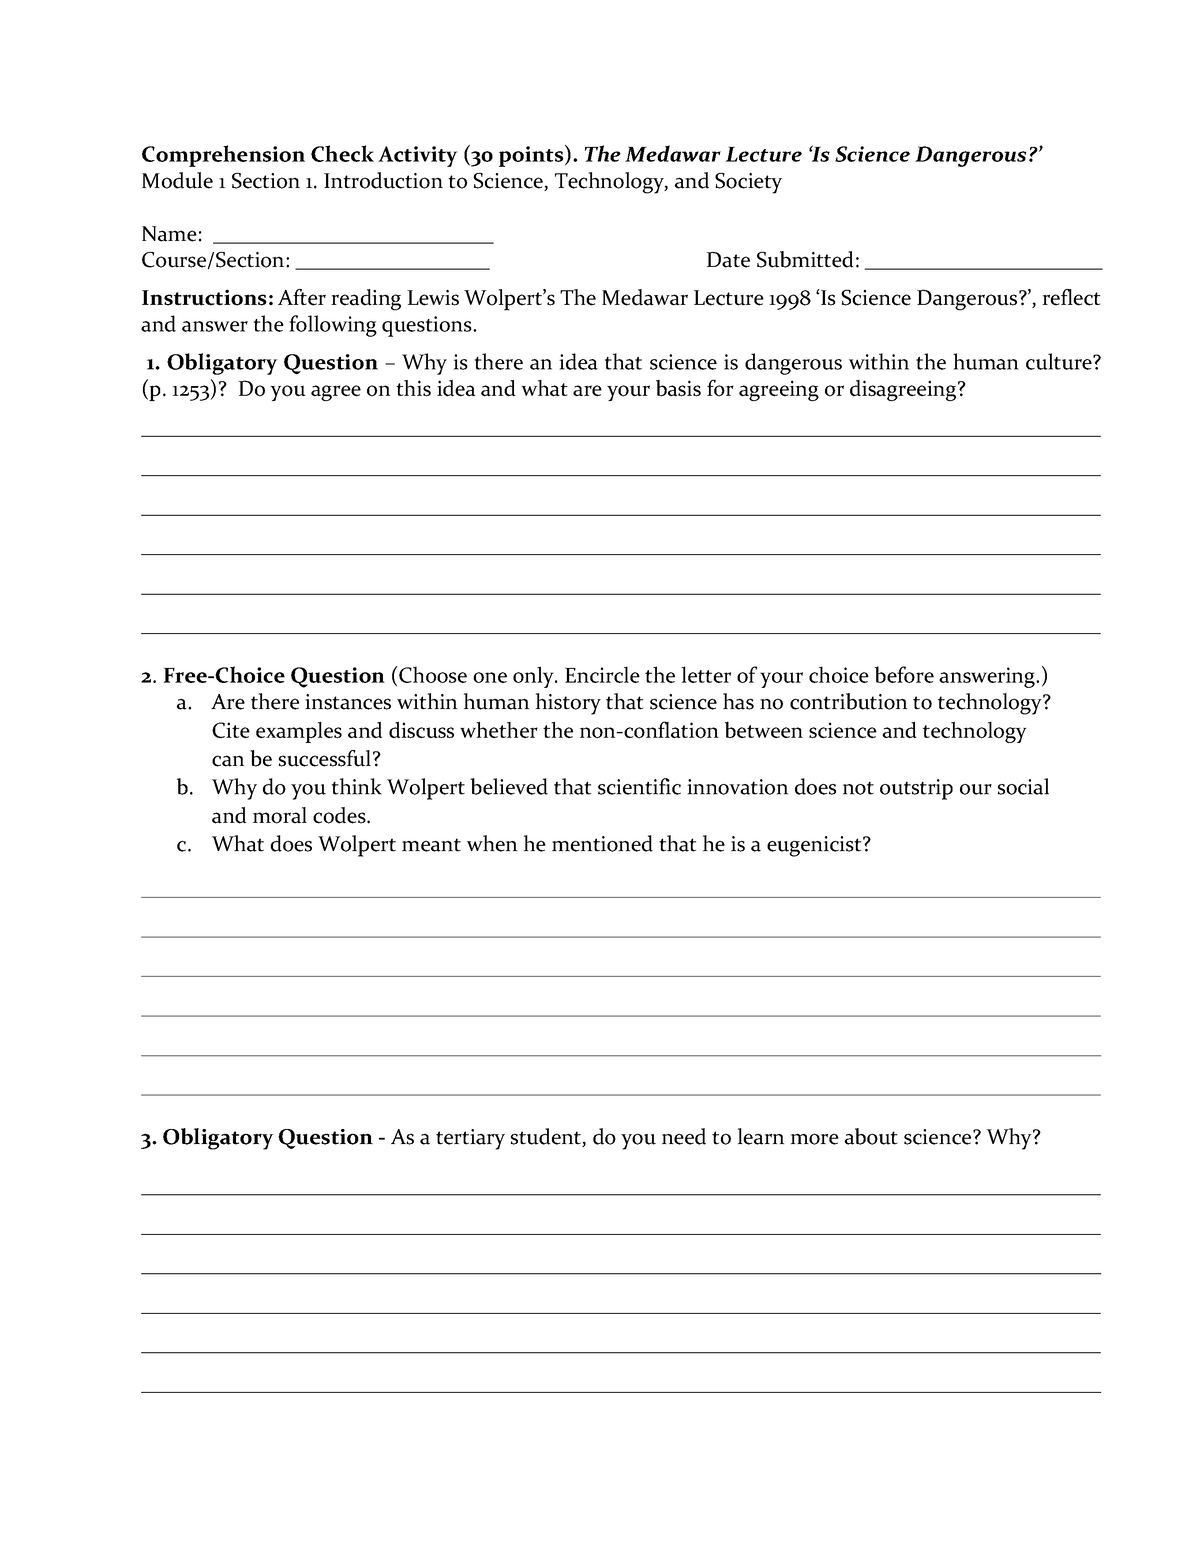 MRR 1 Comprehension Check Questions SY 22 23 - Science, Technology ...